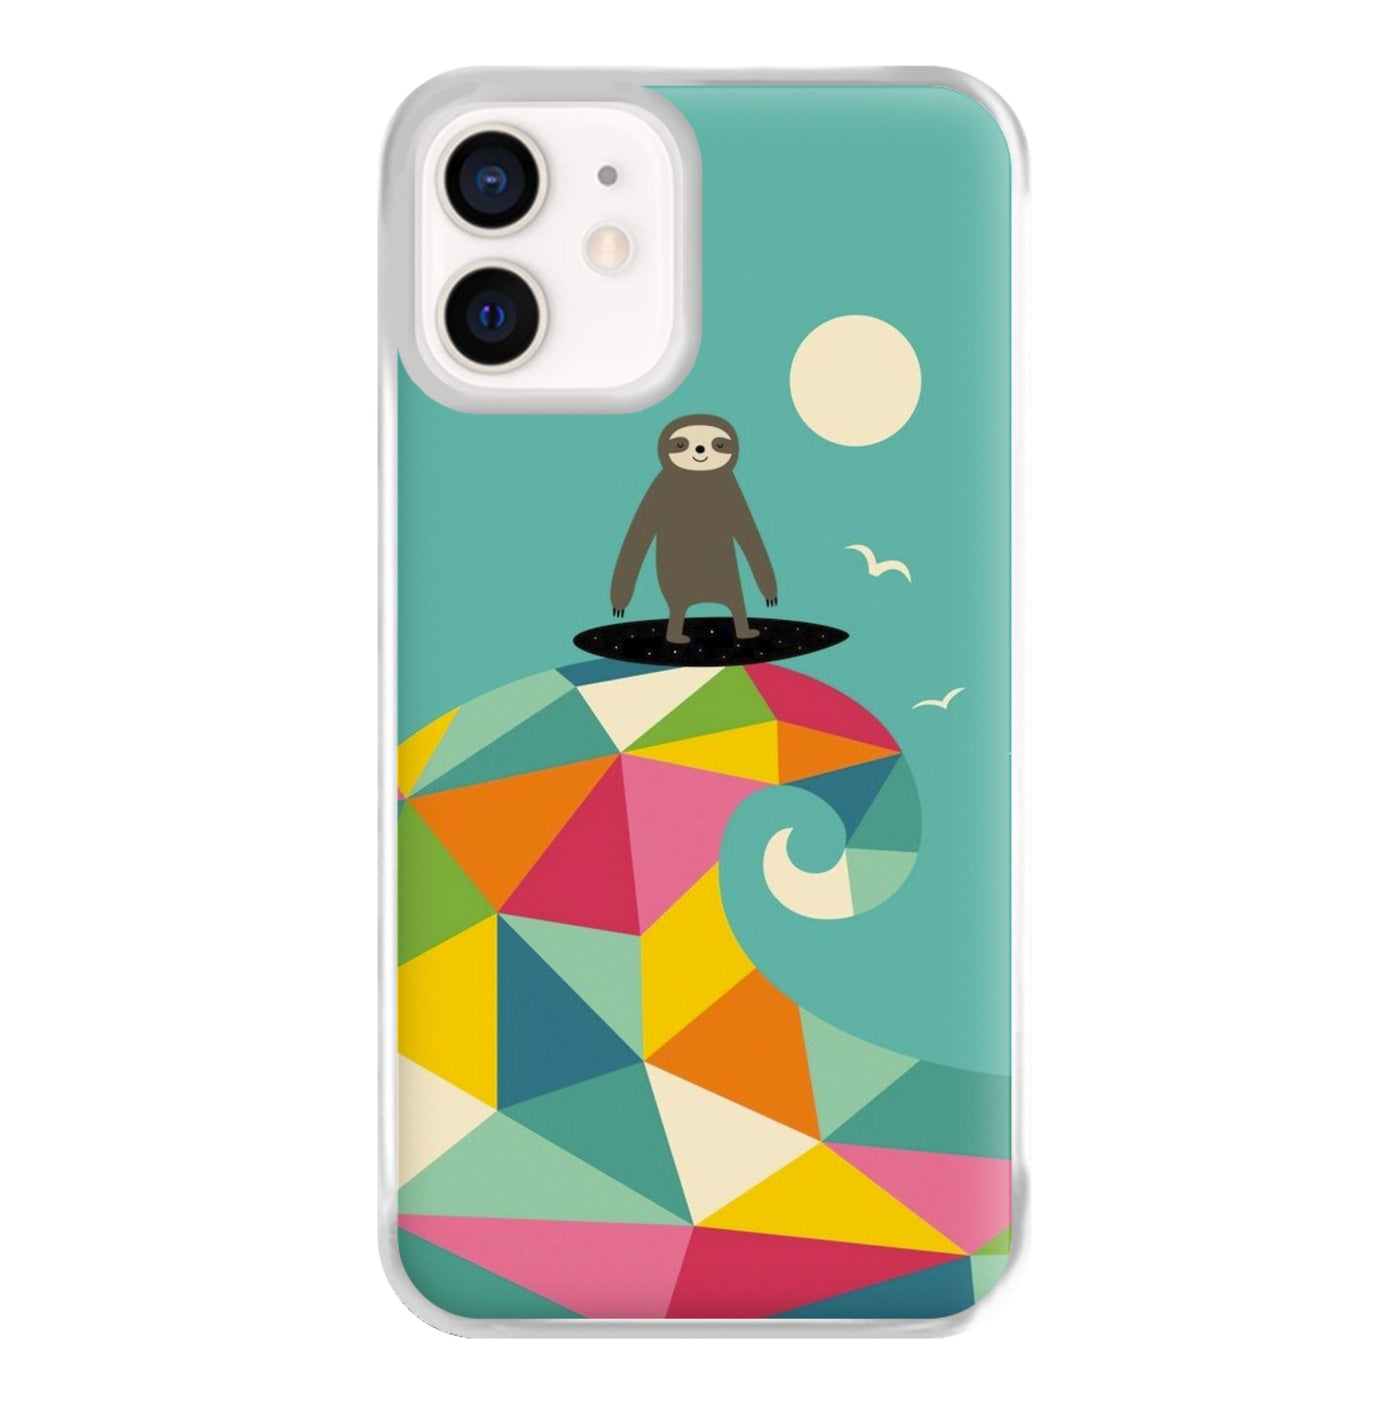 Surfing Sloth Phone Case